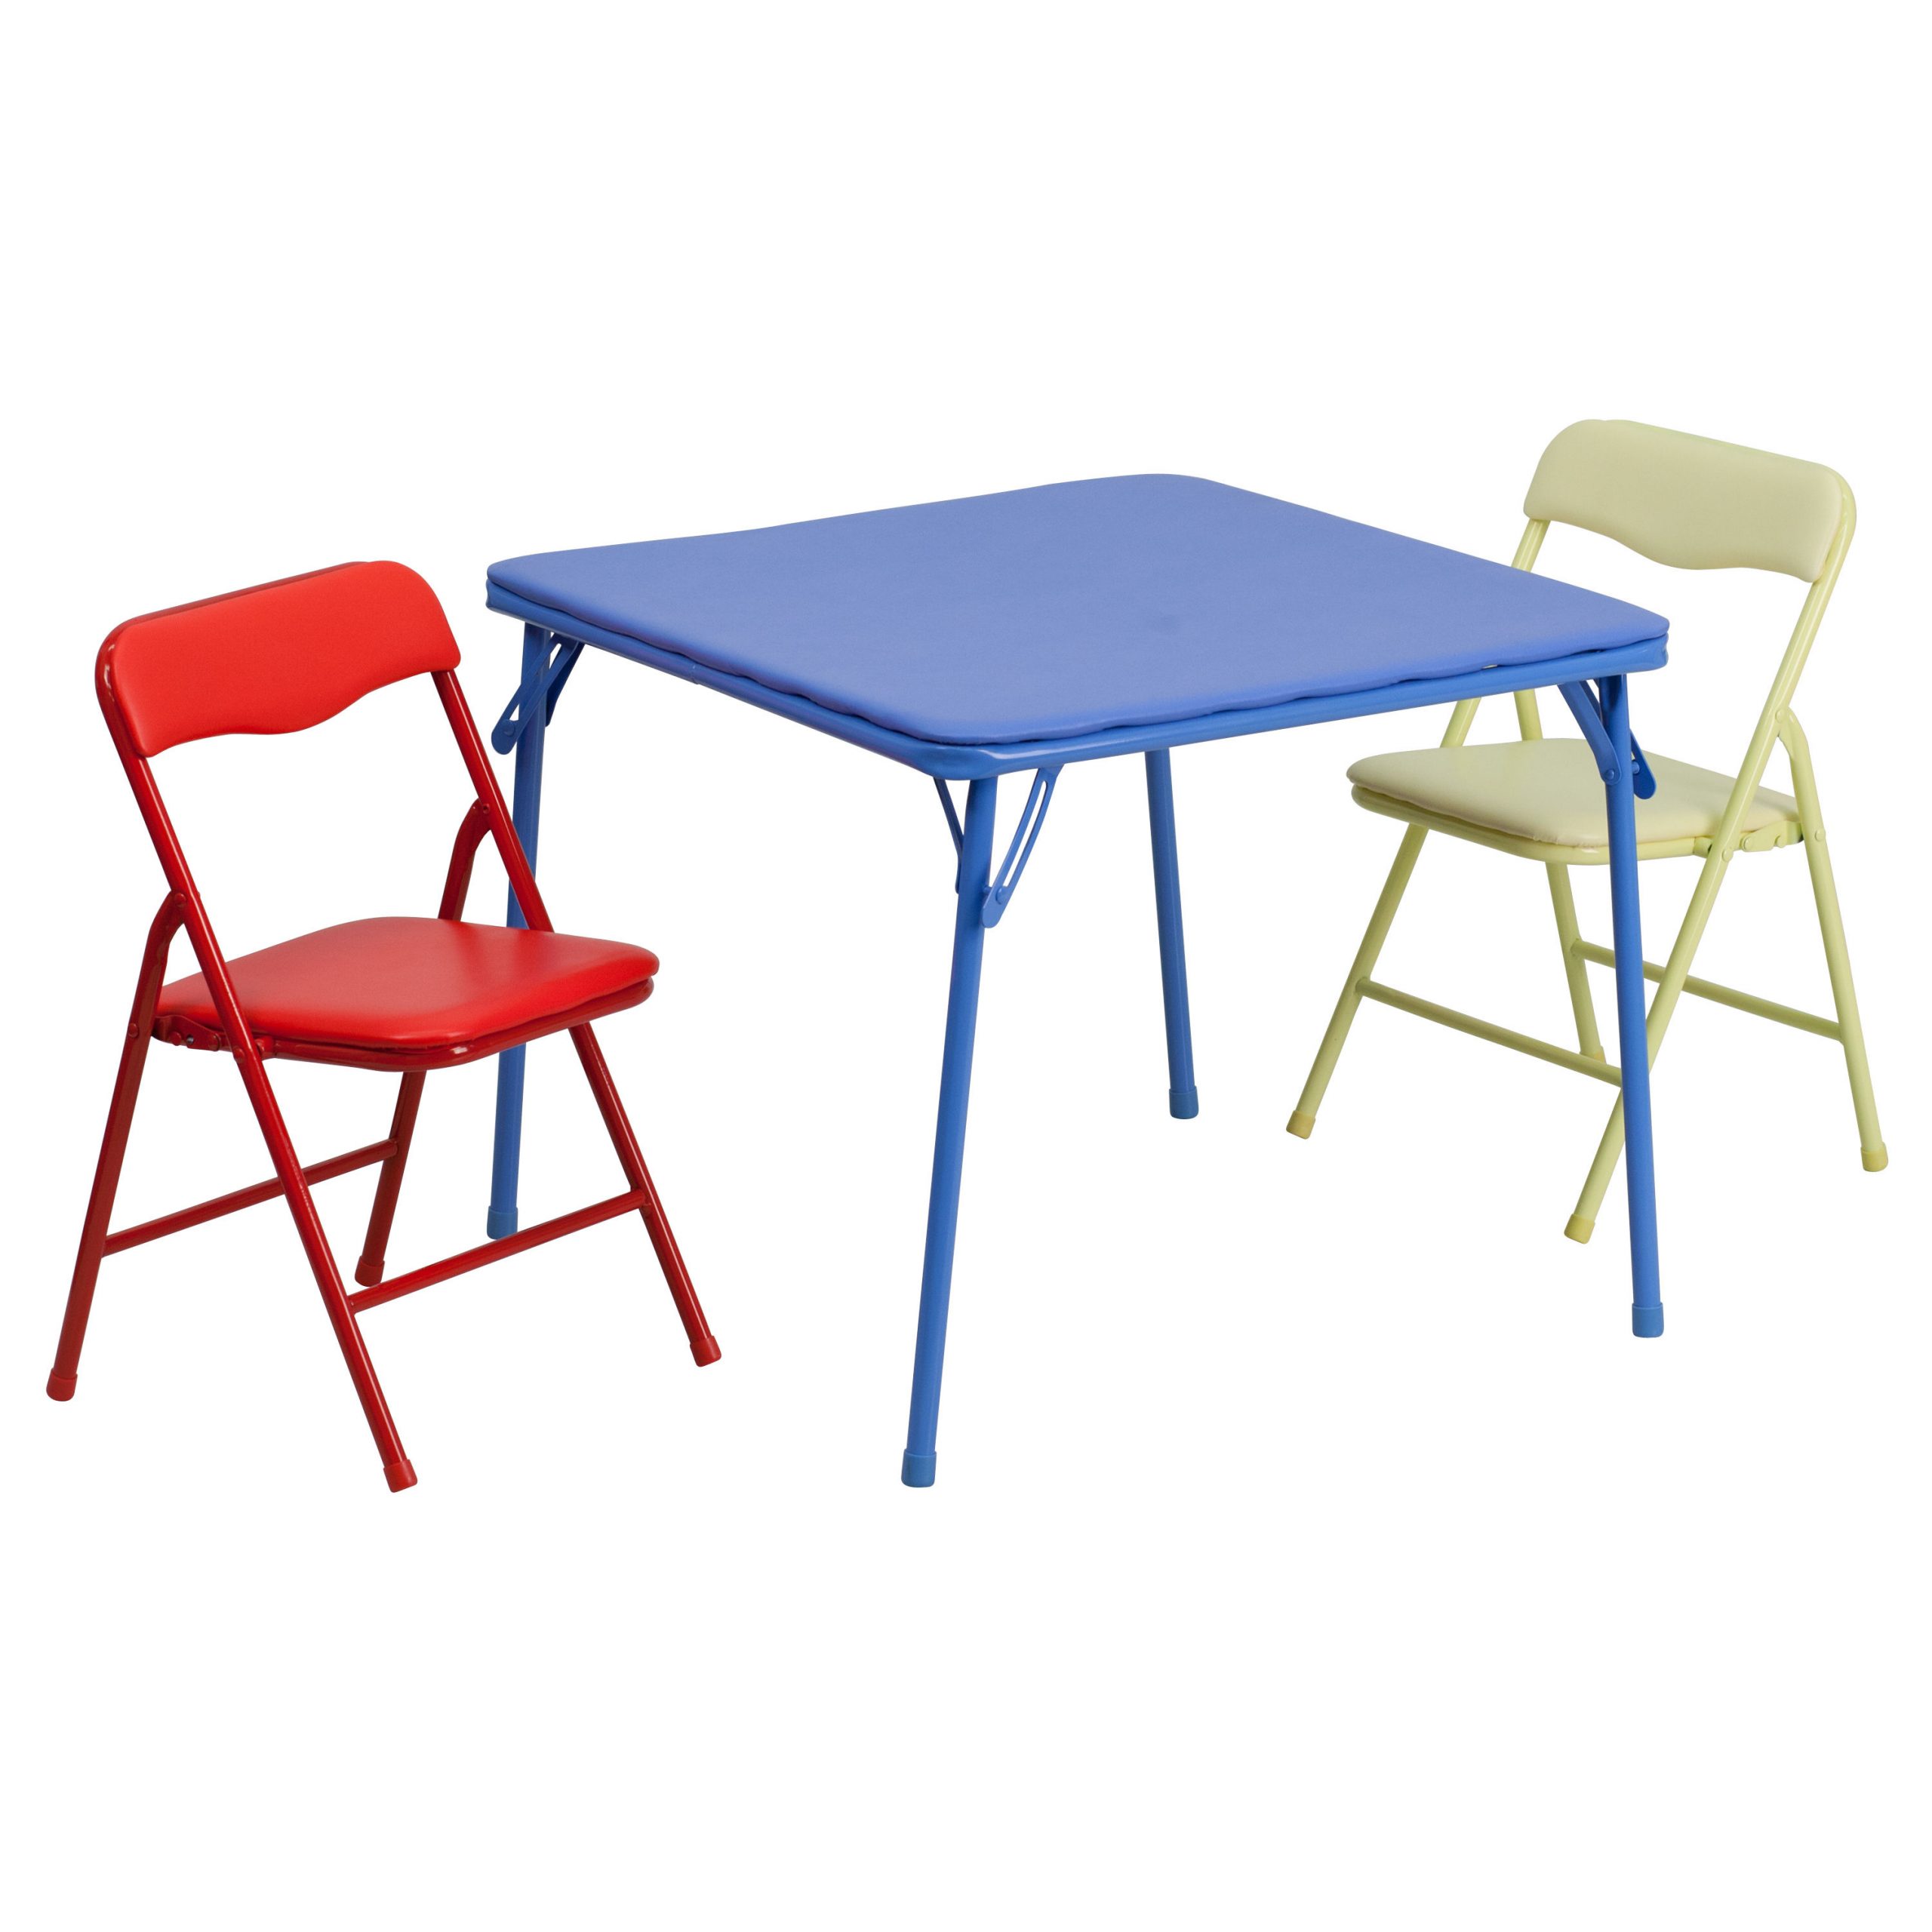 Child Size Folding Table And Chairs Set • Display Cabinet